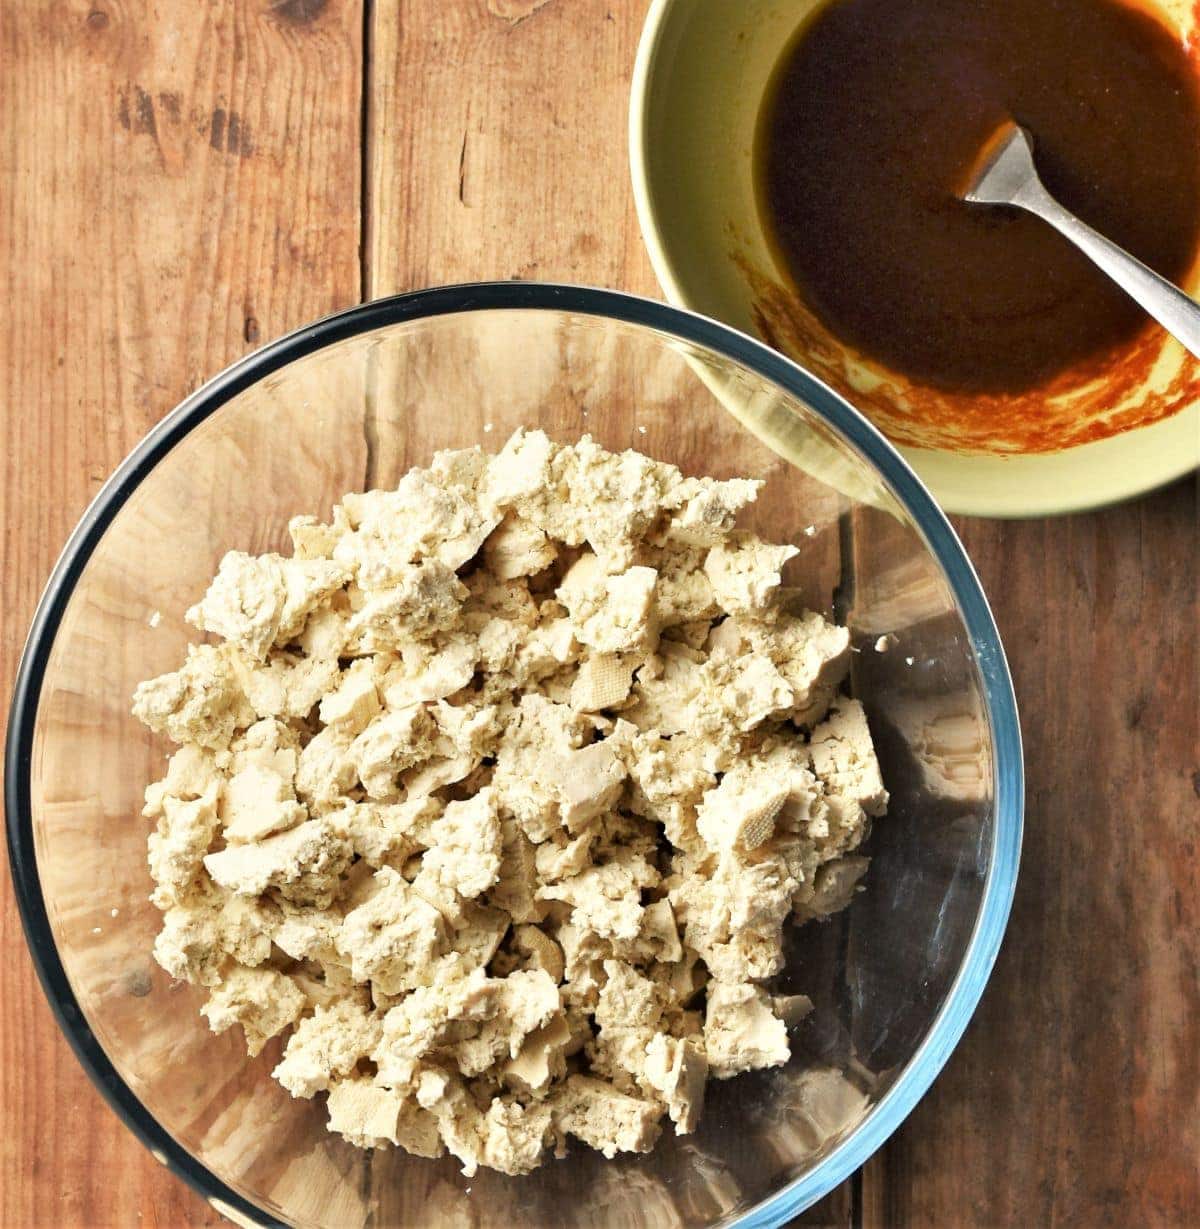 Crumbled tofu in mixing bowl and marinade in another bowl.